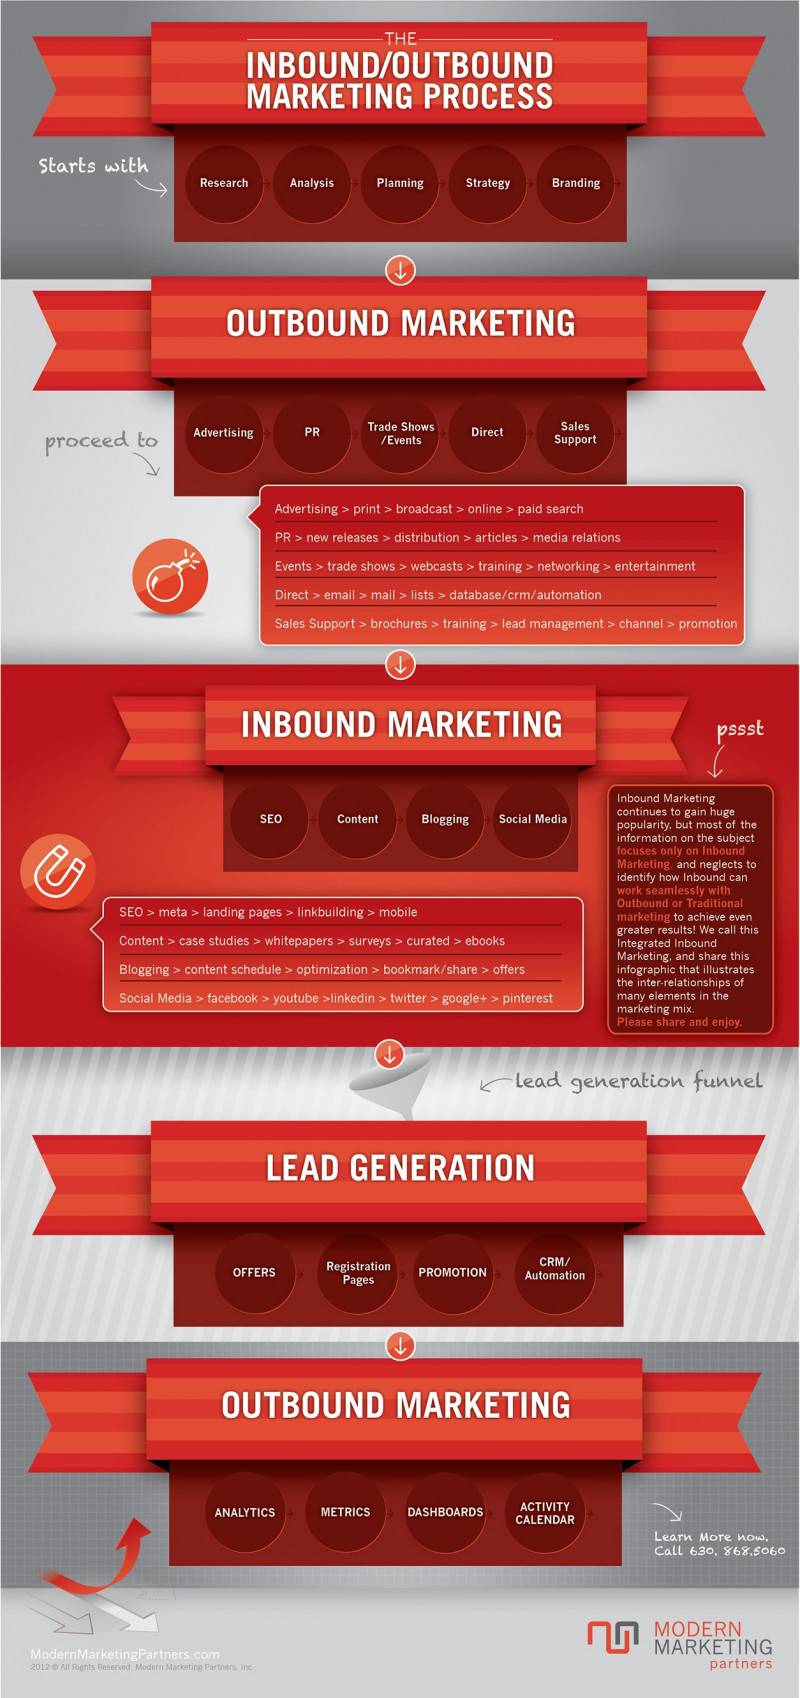 A connection between inbound and outbound marketing.